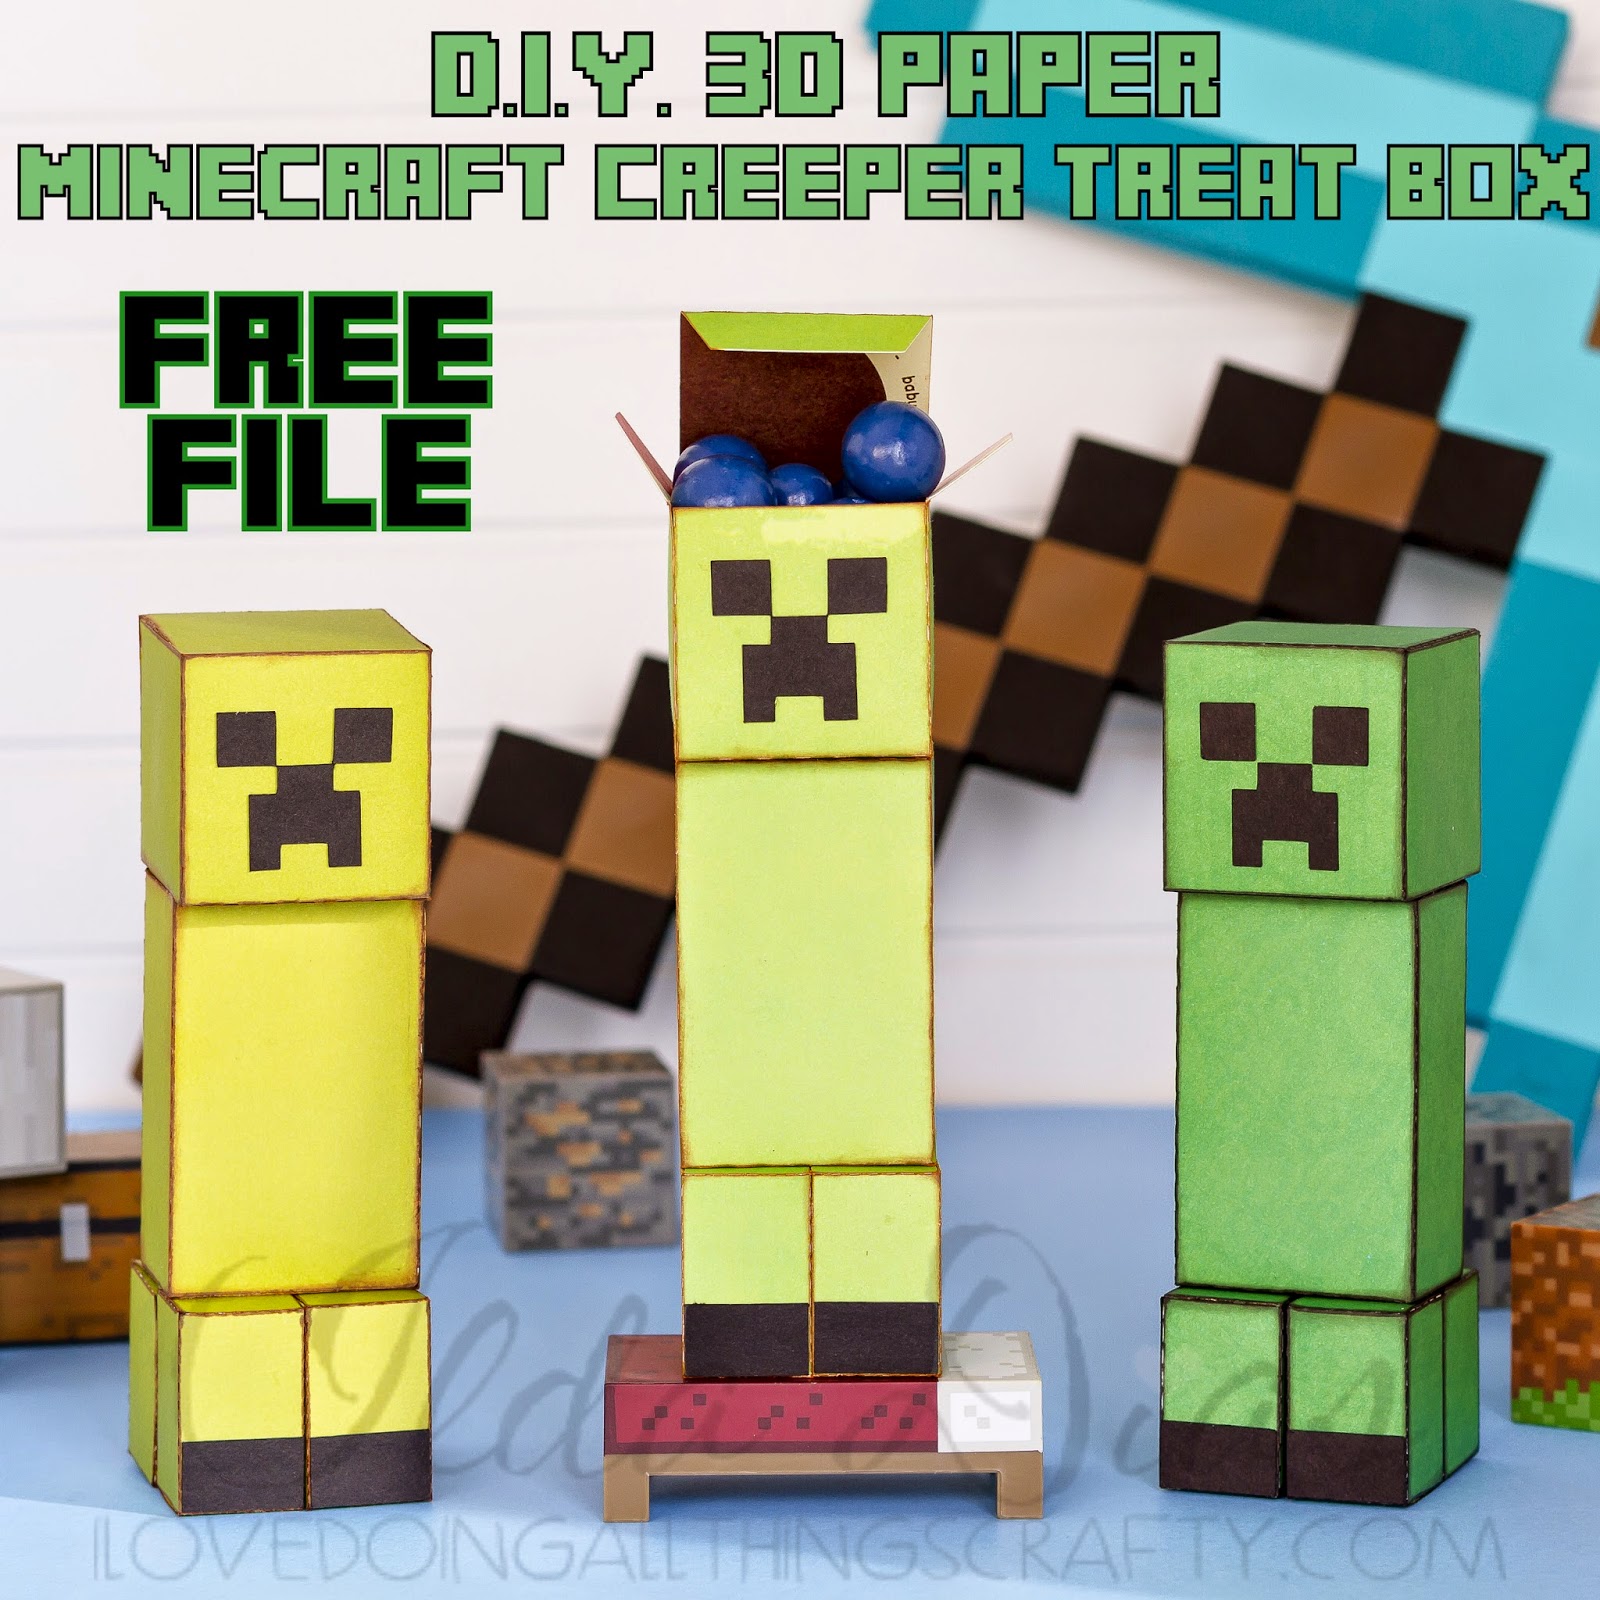 Download I Love Doing All Things Crafty 3d Paper Minecraft Creeper Treat Box Free File